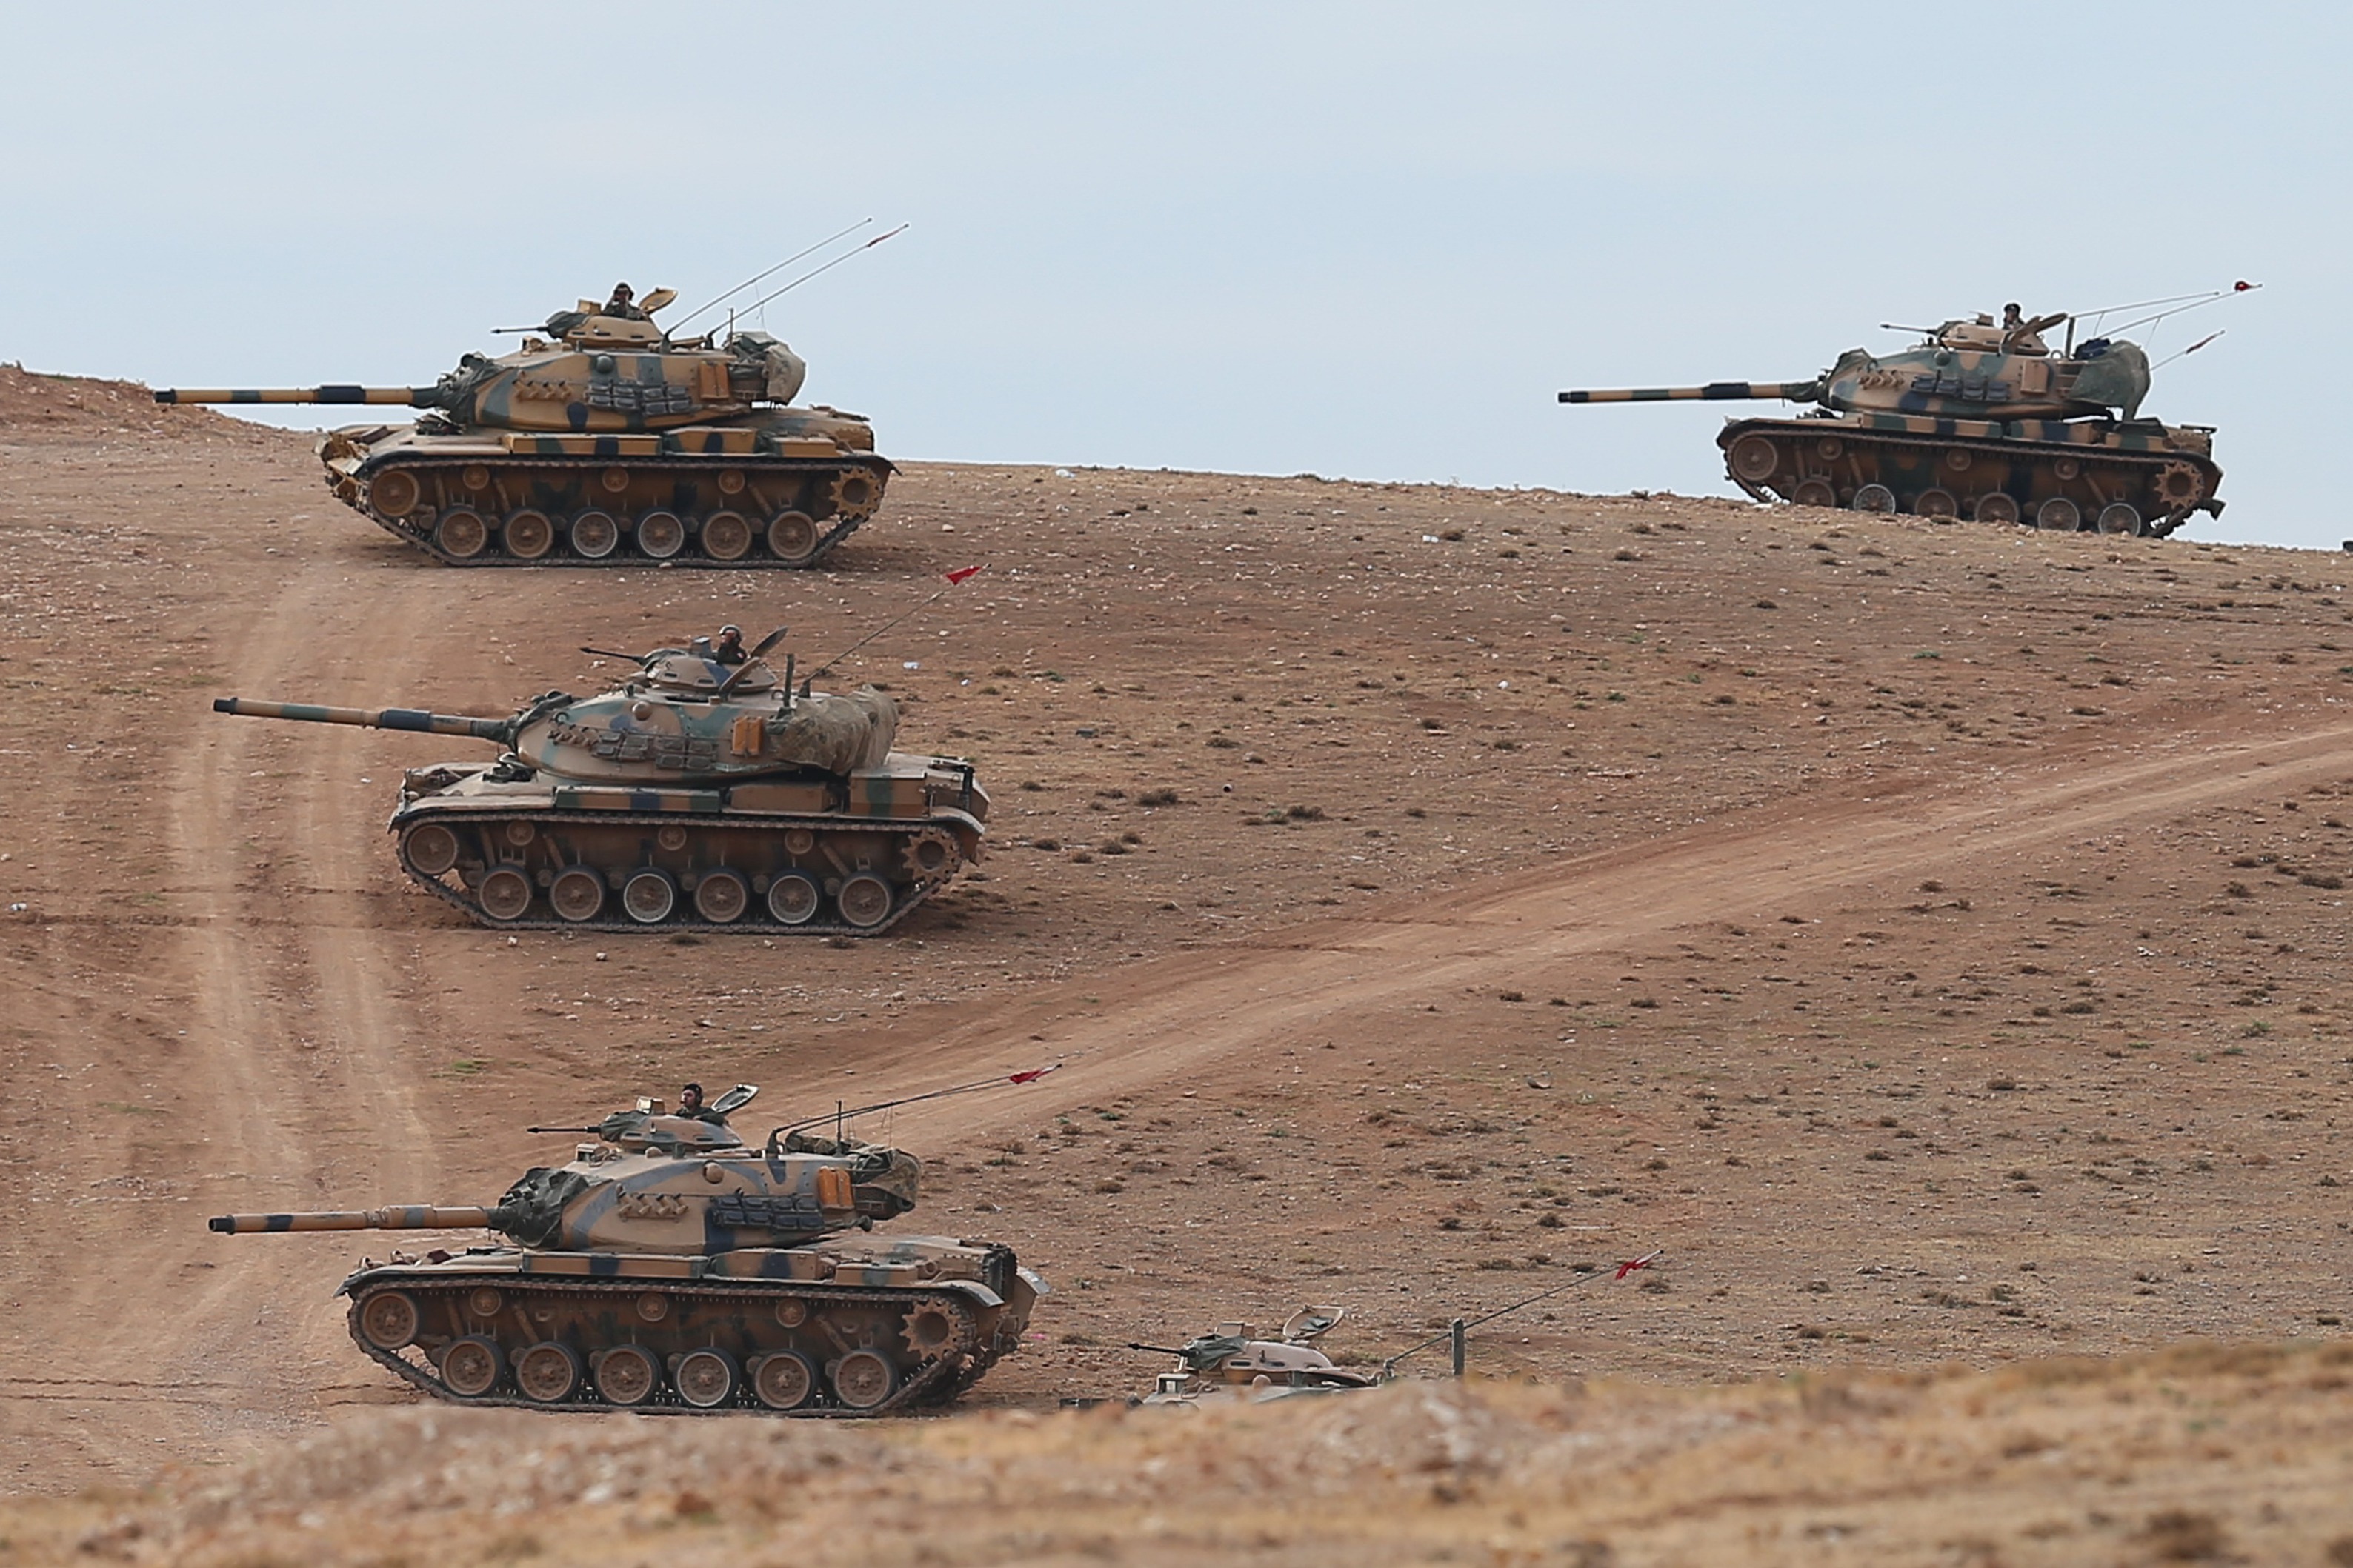 Turkish forces deepen push into Syria, draw U.S. rebuke over their target